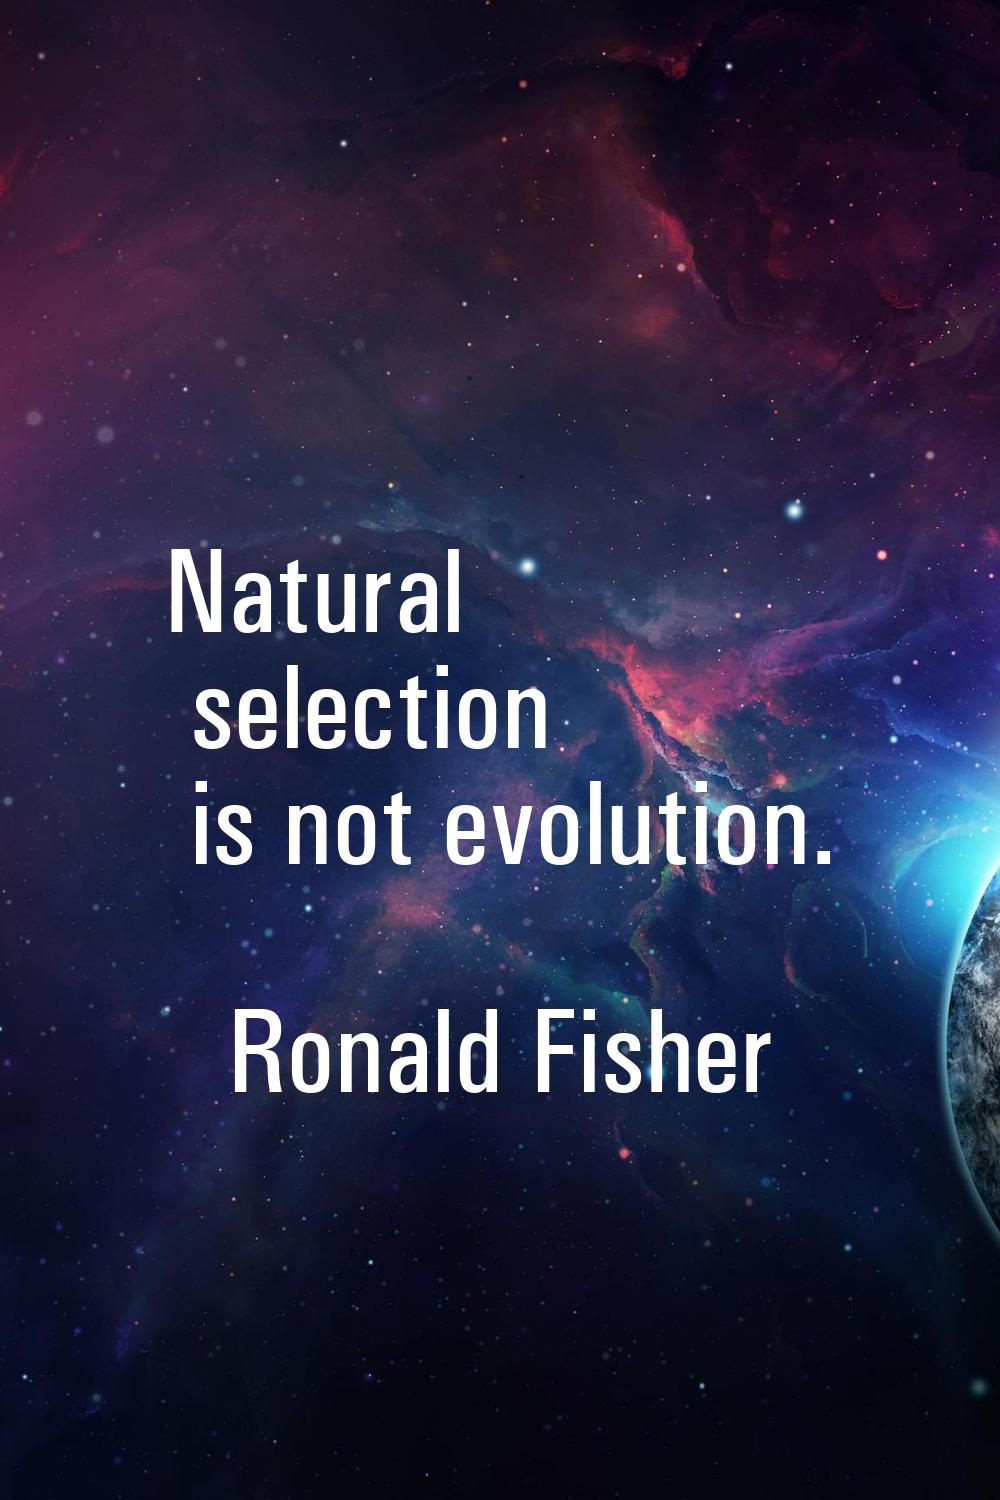 Natural selection is not evolution.